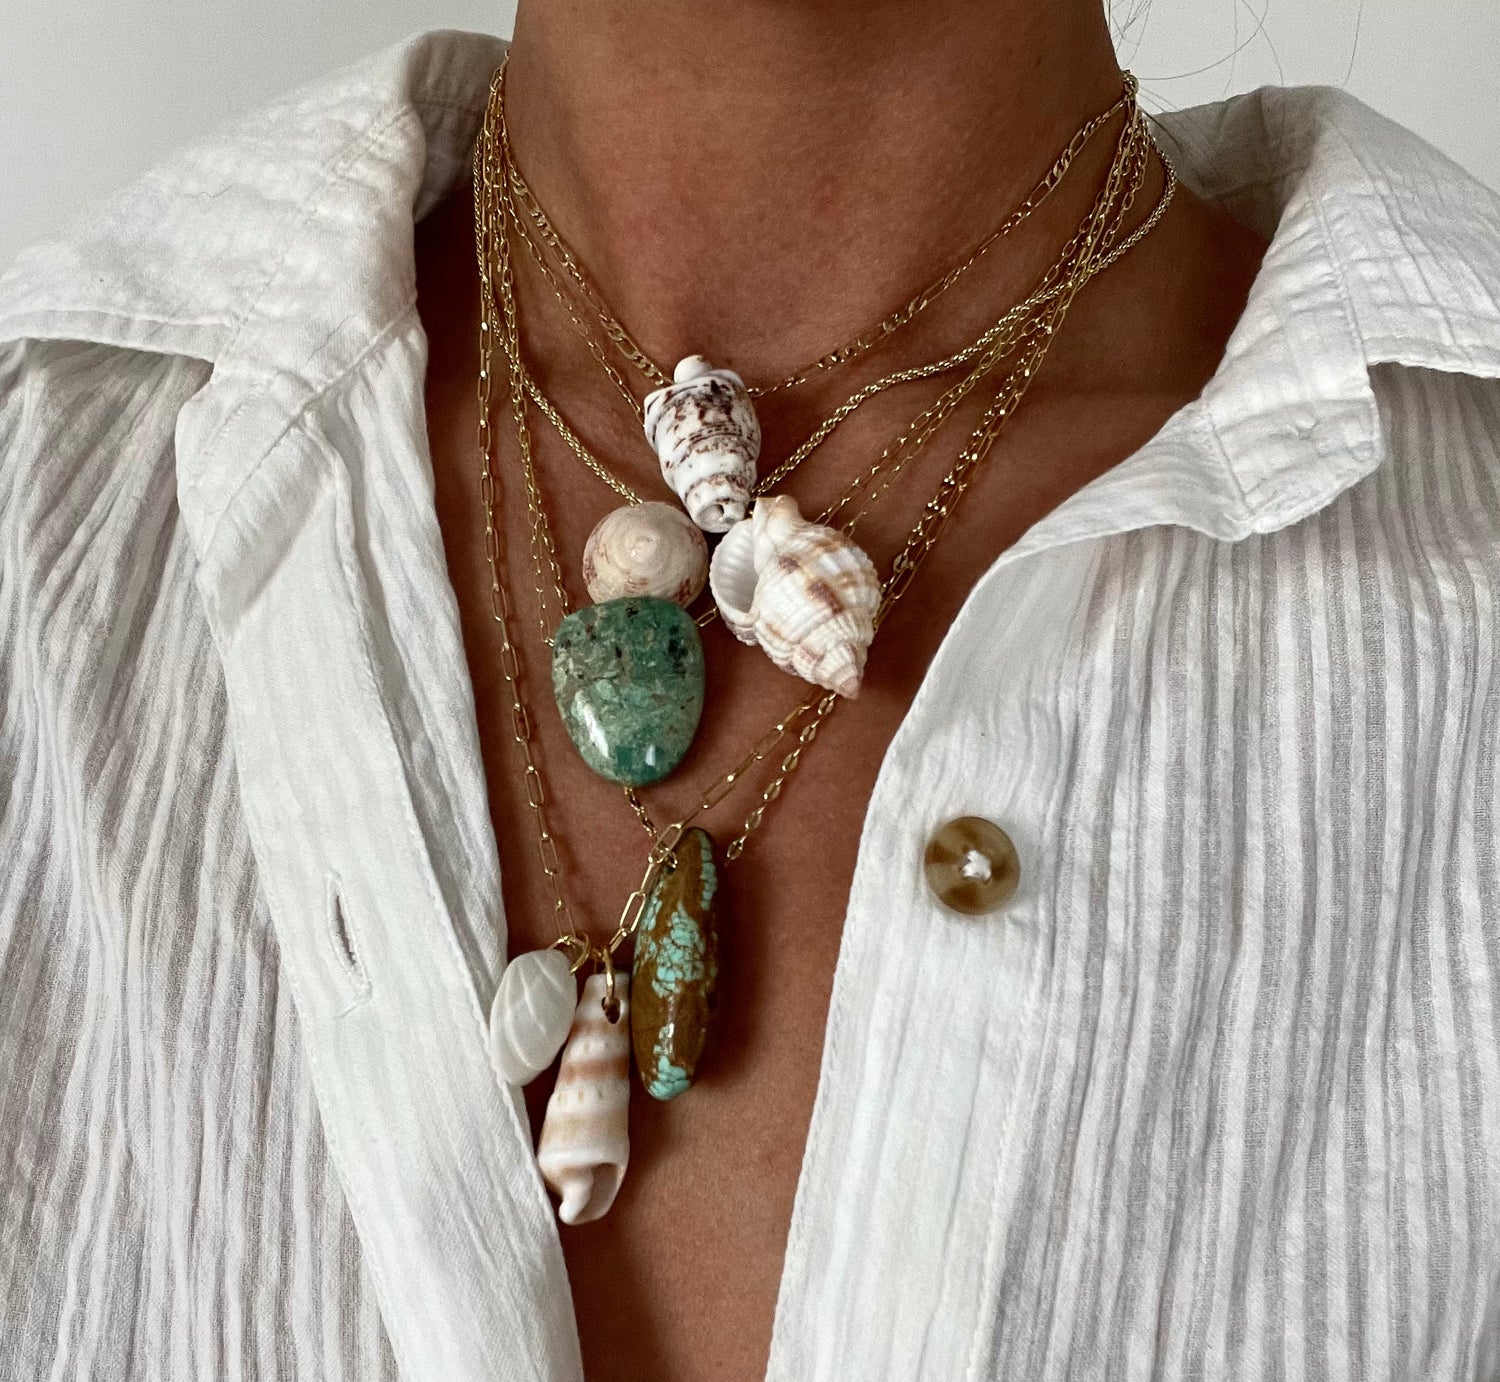 Soaked Jewelry Collection